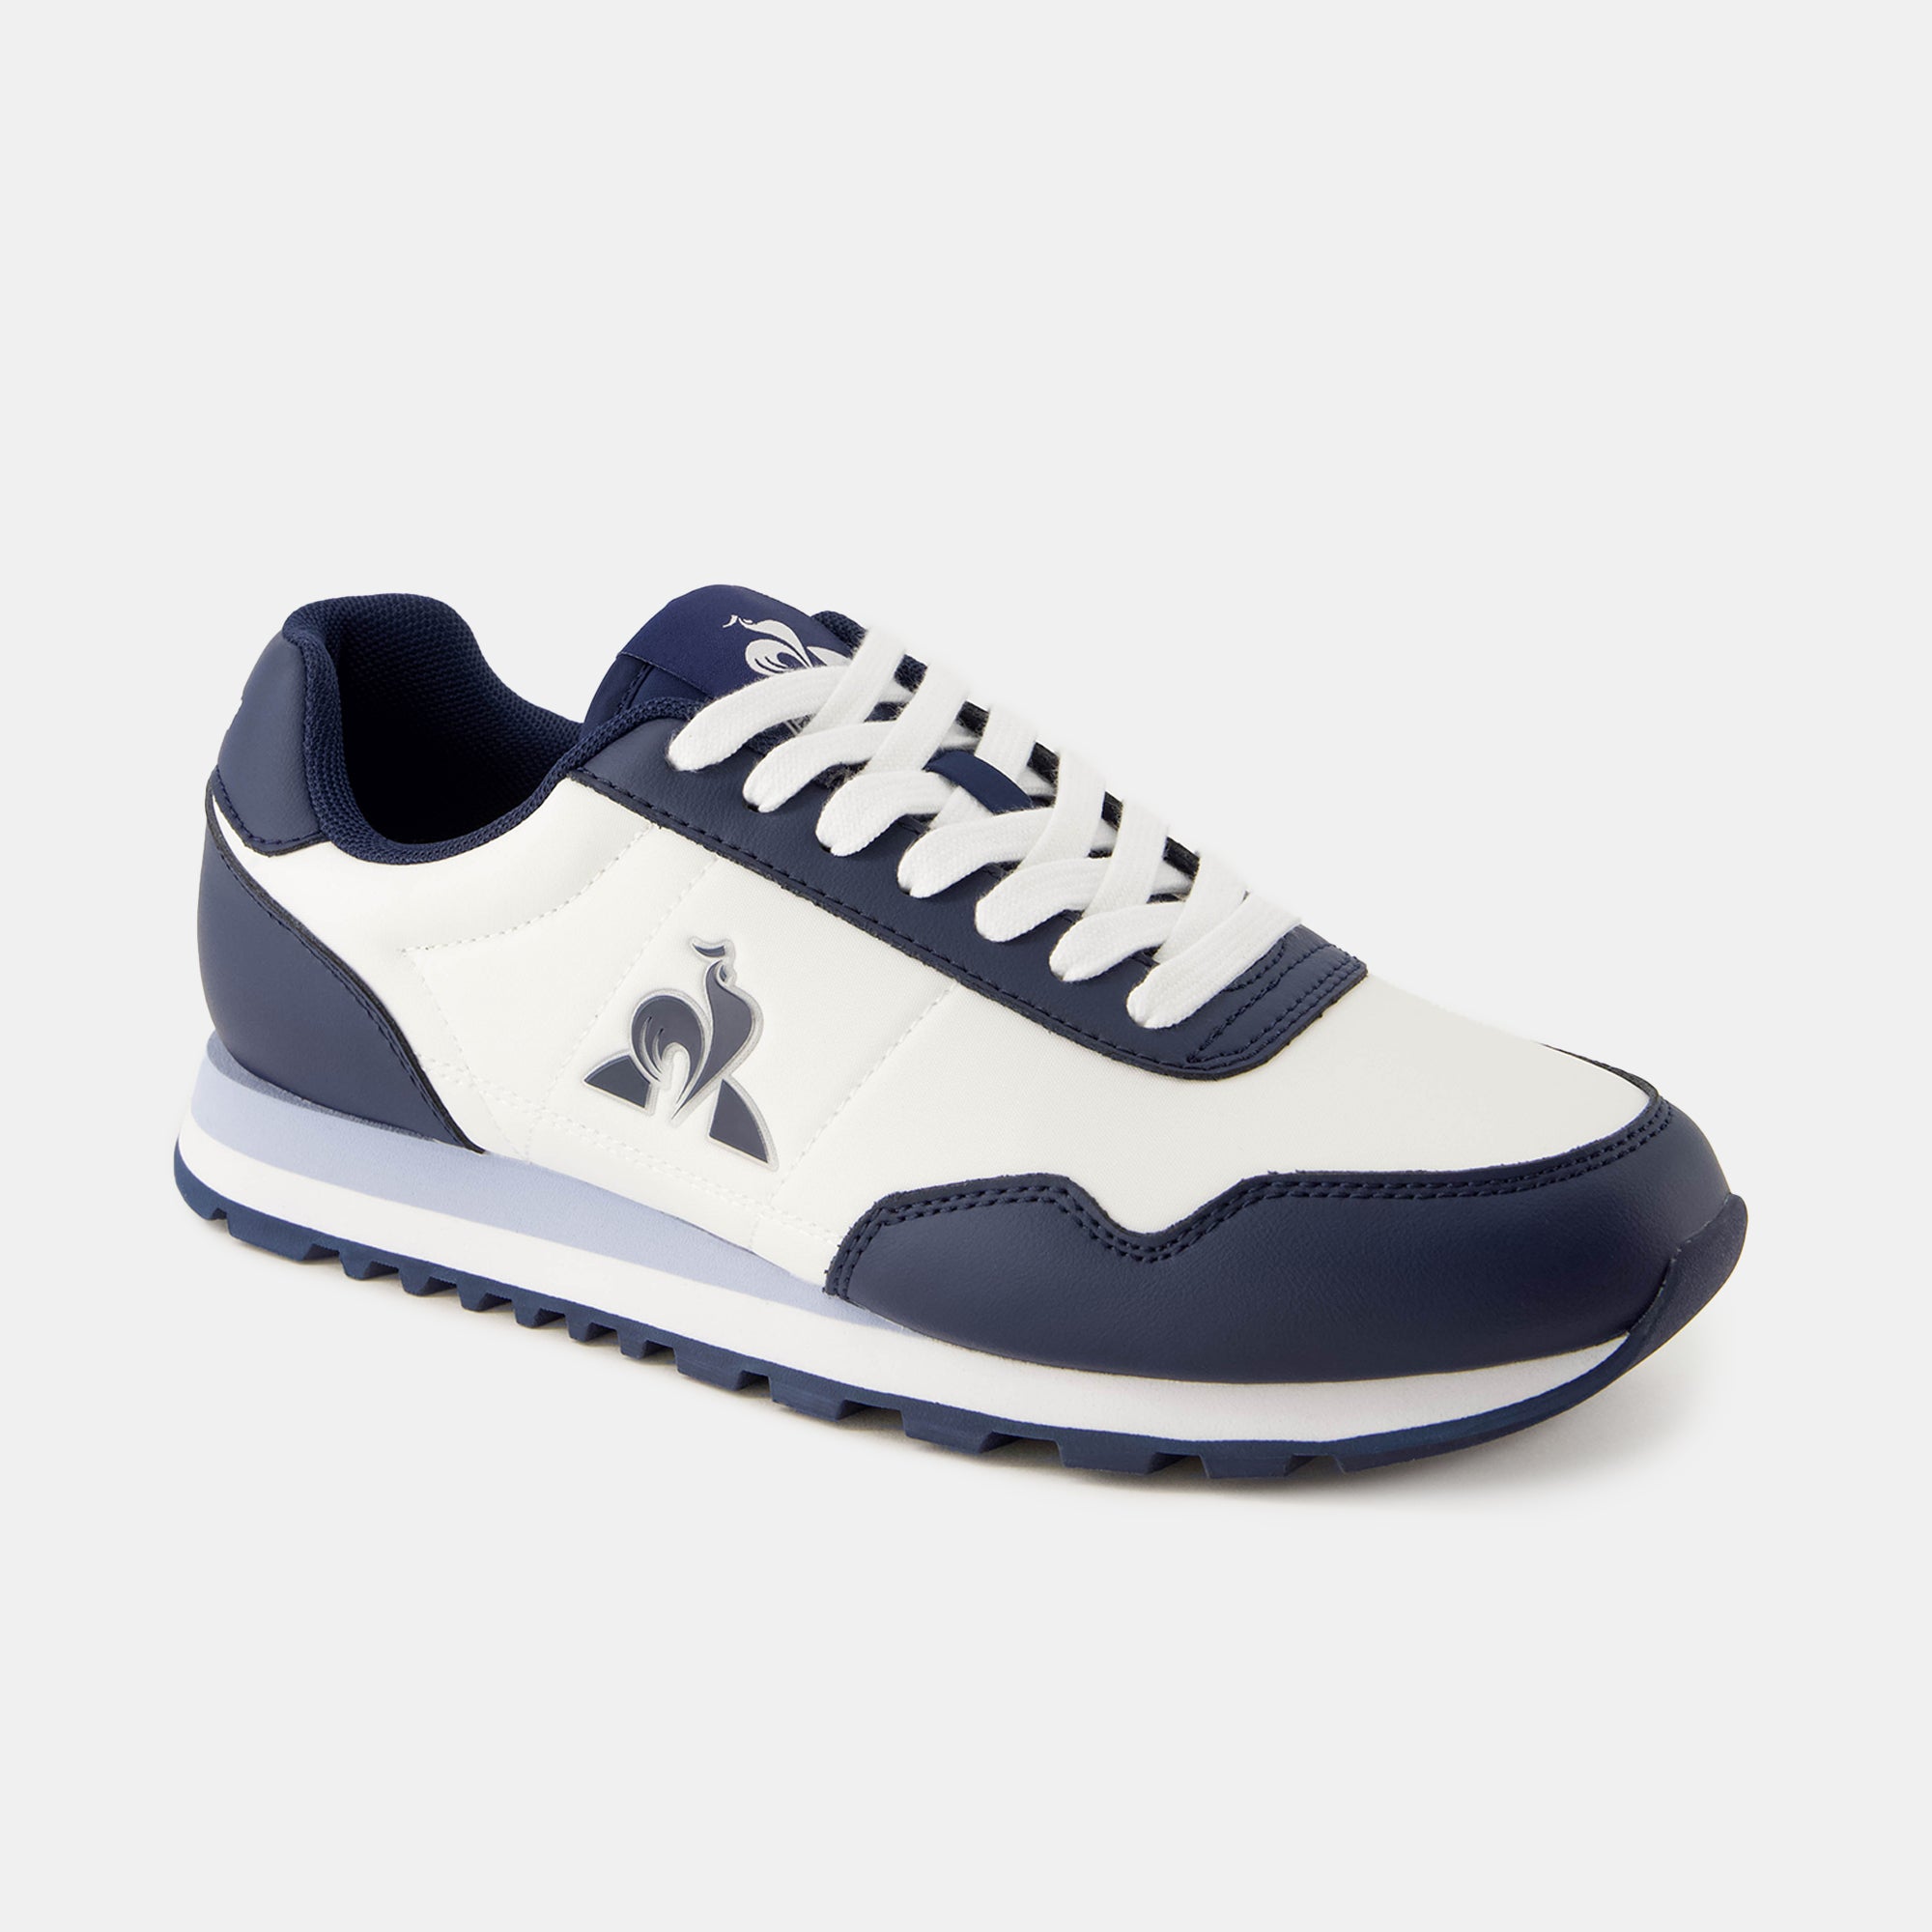 2423235-ASTRA_2 optical white/dress blue | Chaussures ASTRA_2 Unisexe